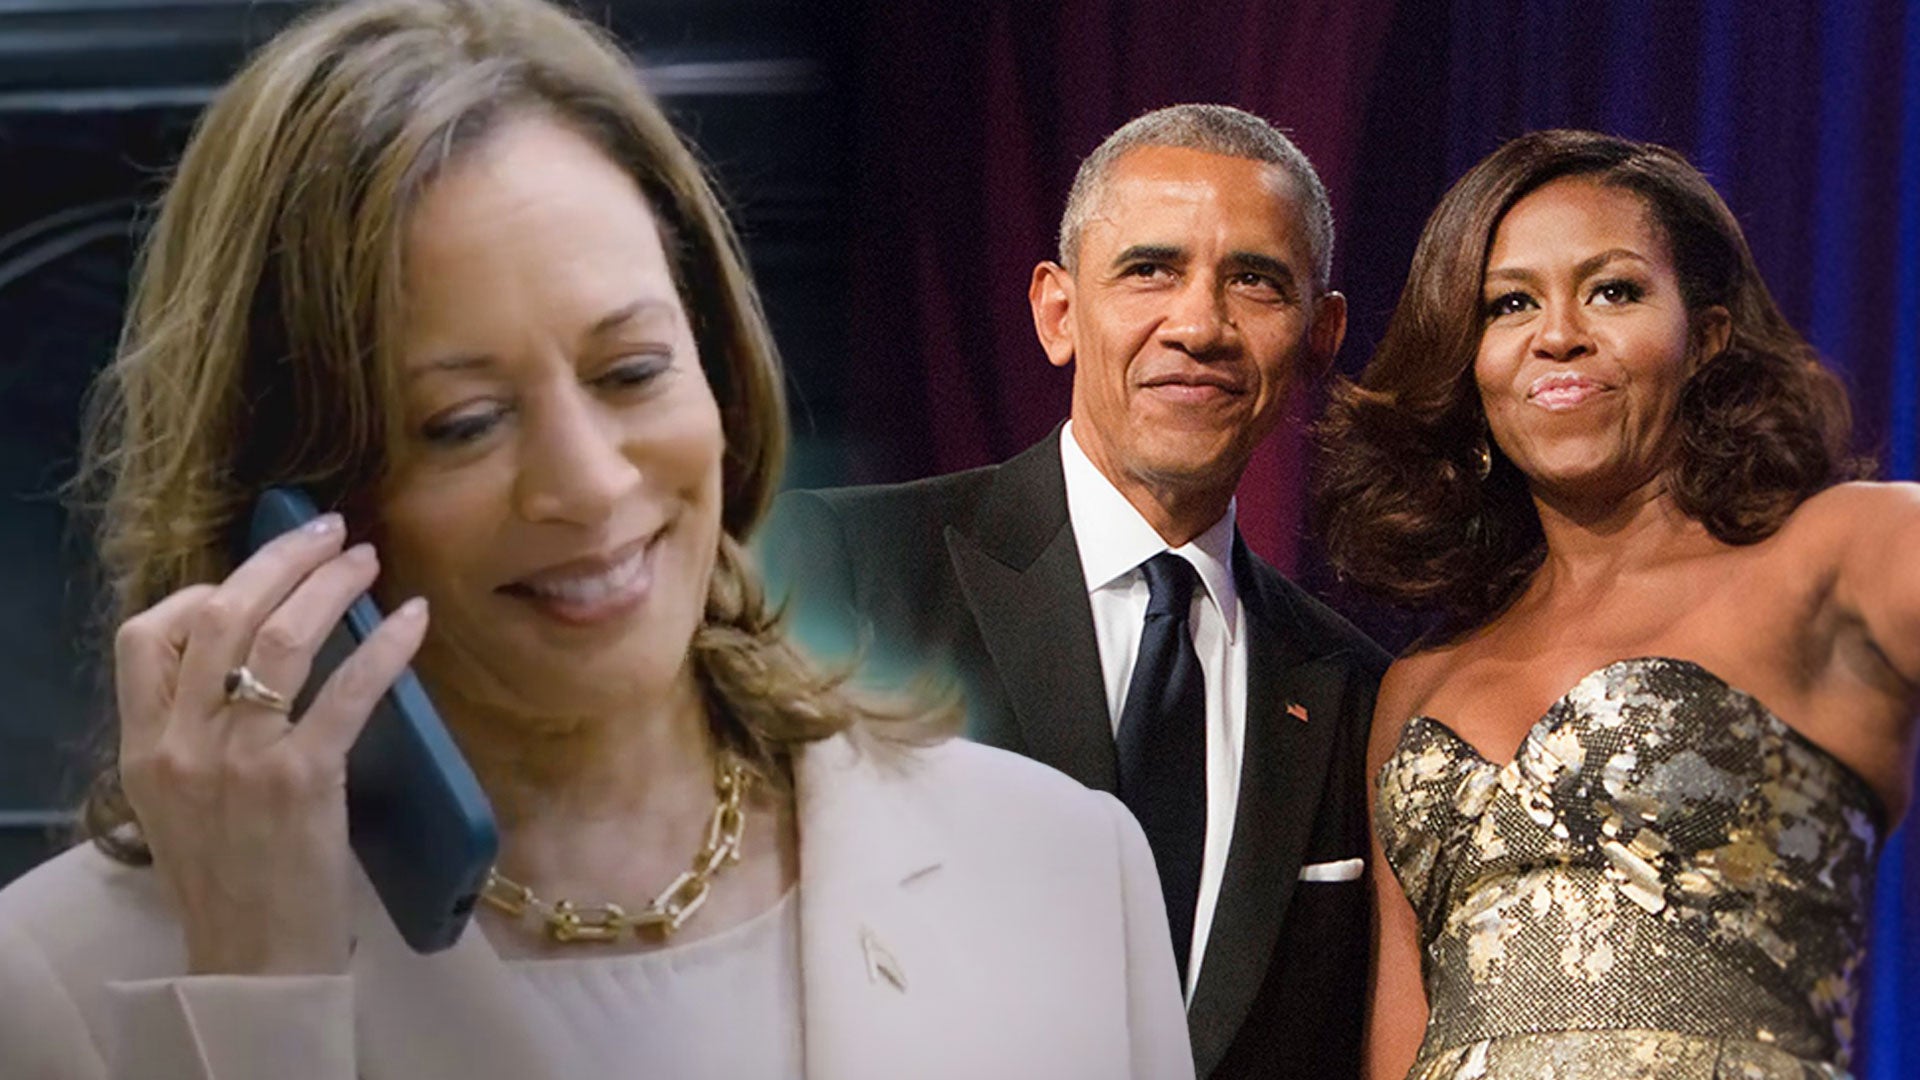 Watch Kamala Harris React to Barack and Michelle Obama Endorsing Her Presidential Run